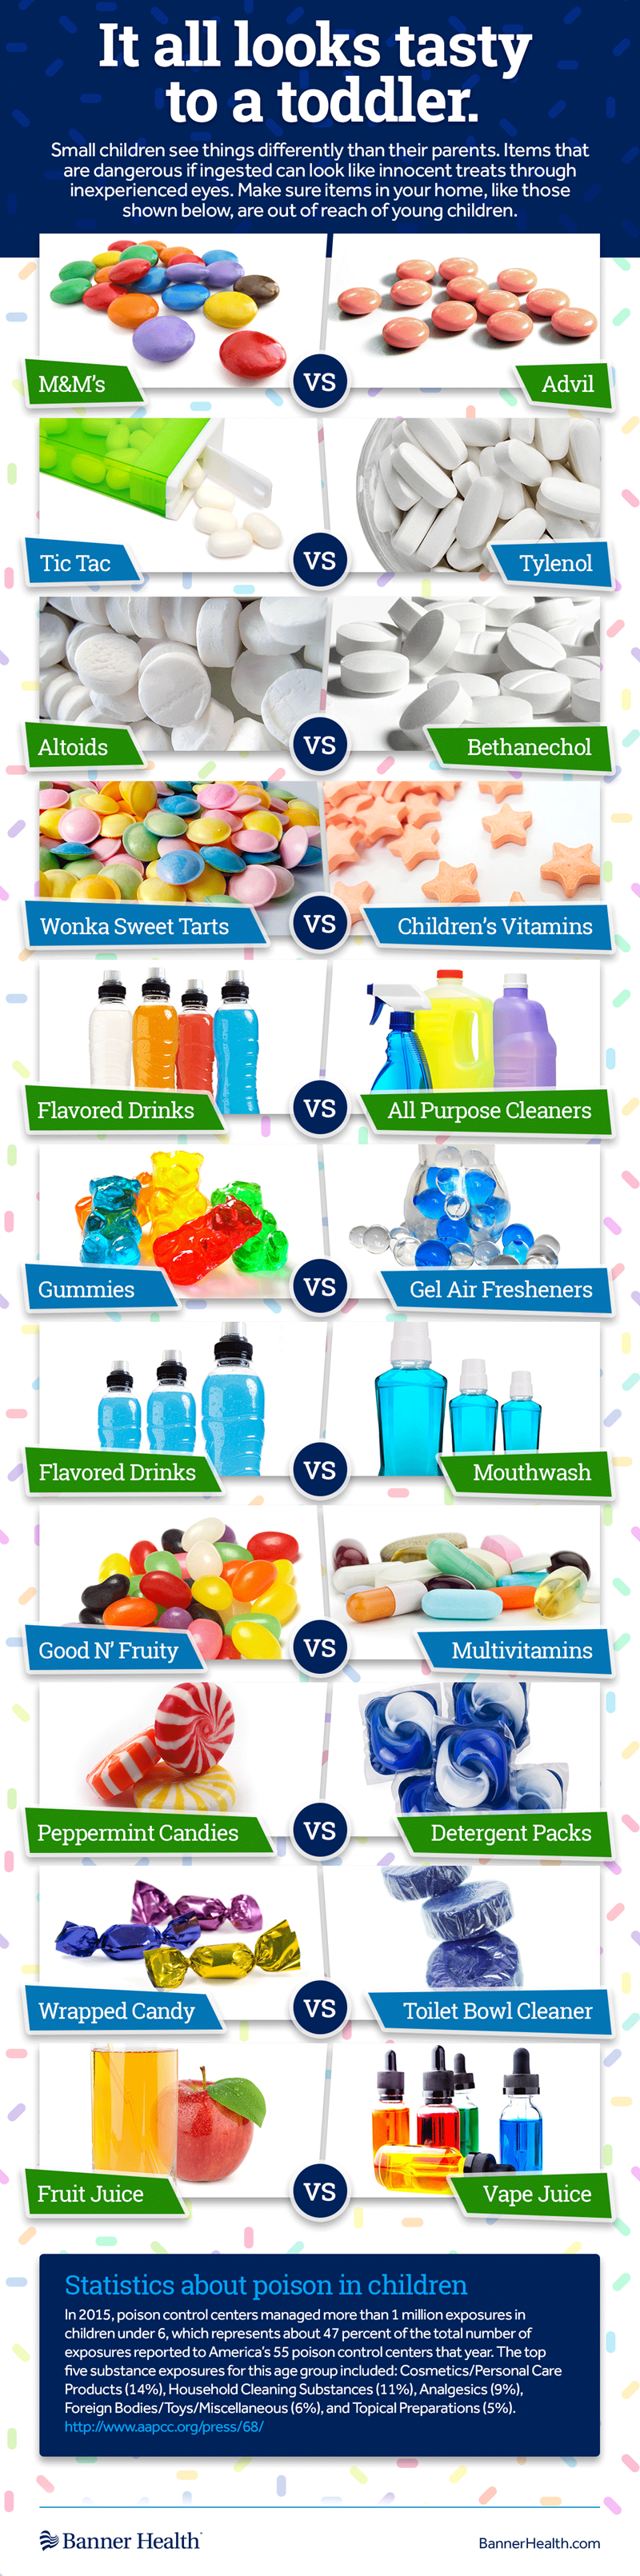 Candy-and-Household-Products-Comparison-Infographic-English